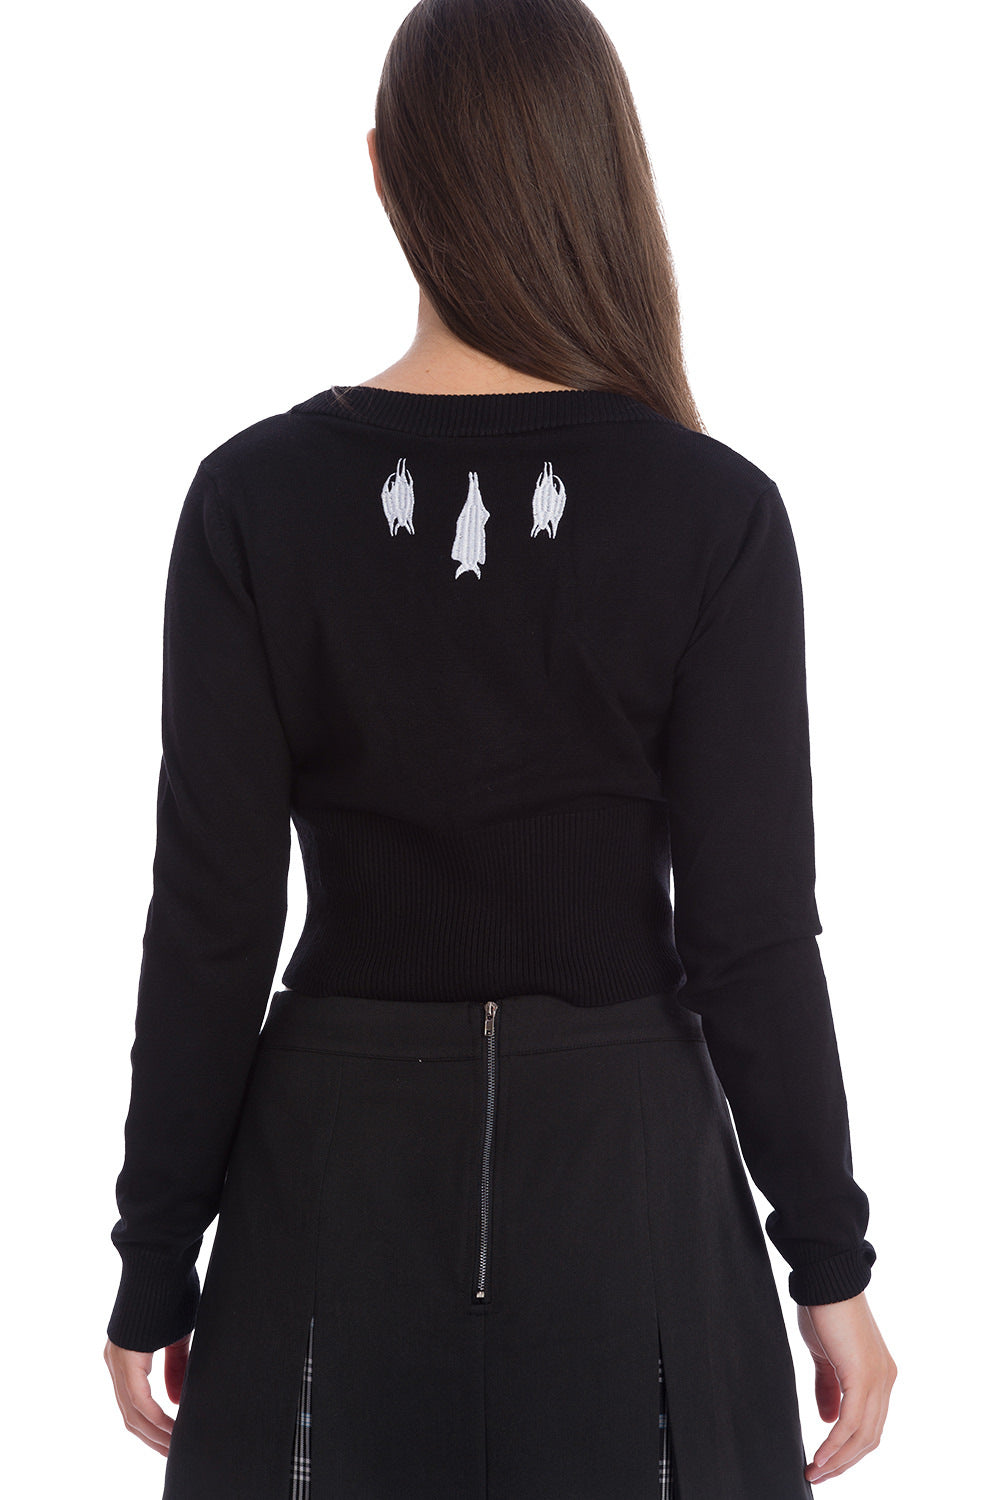 Gothic girl wearing a black long sleeved cardigan with white embroidered hanging bats at the neck